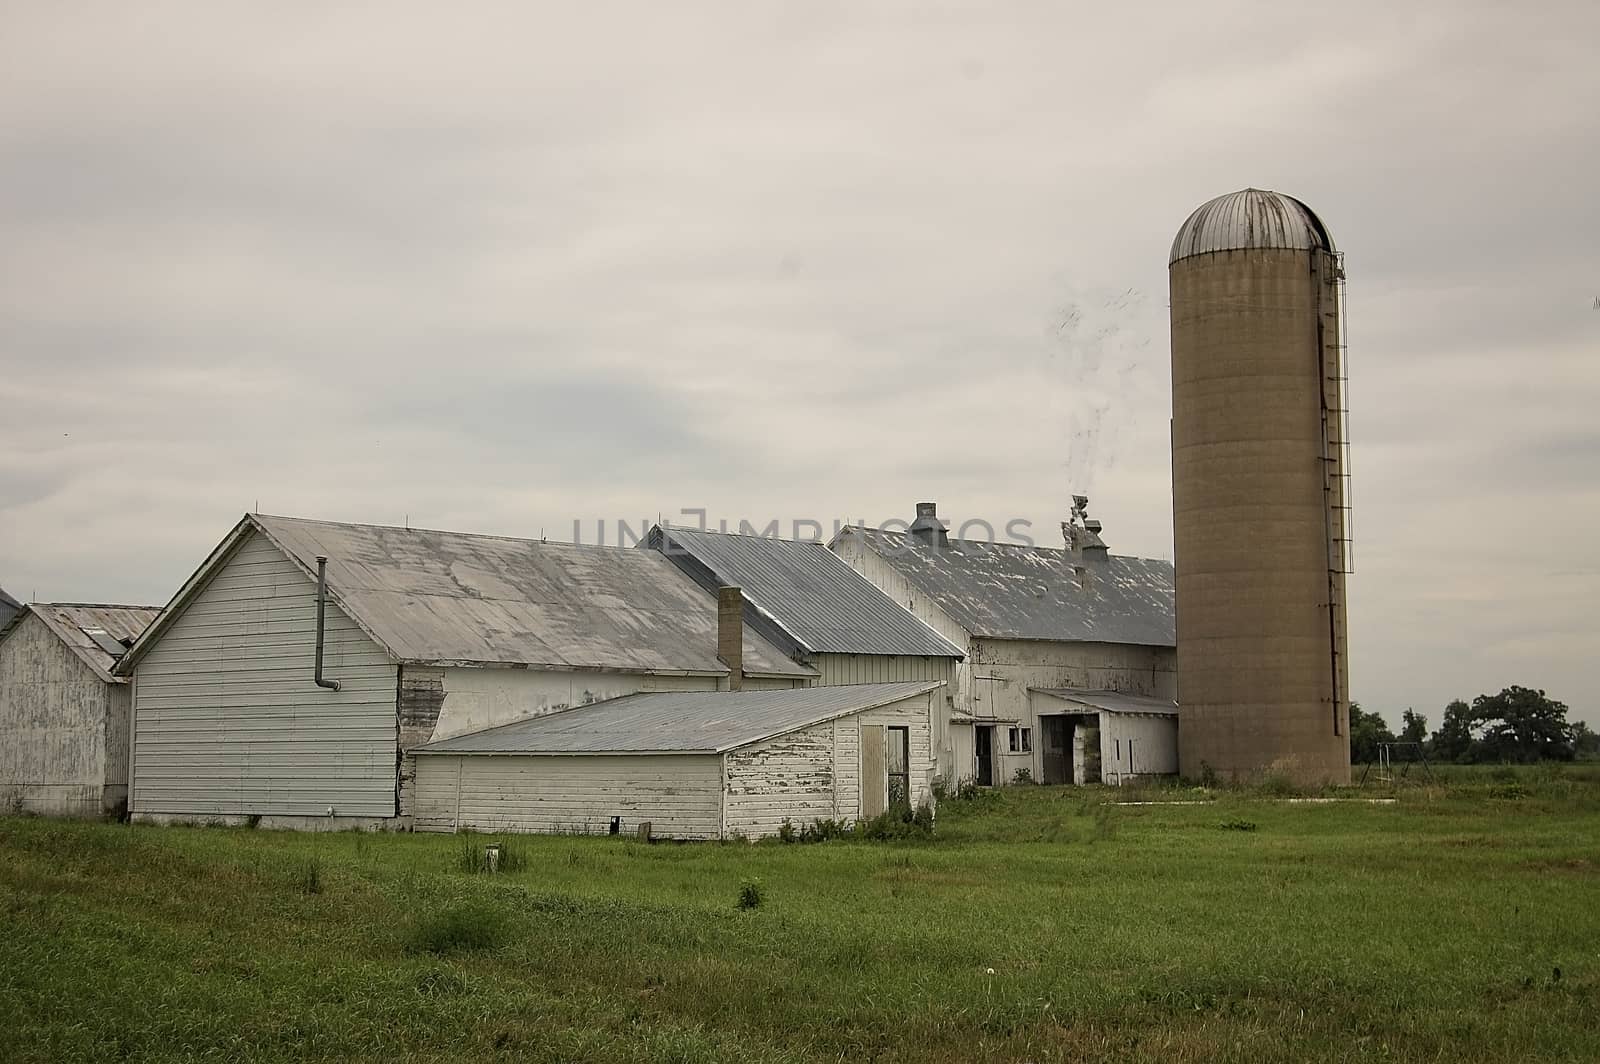 This is a group of vintage farm buildings on overcast day.